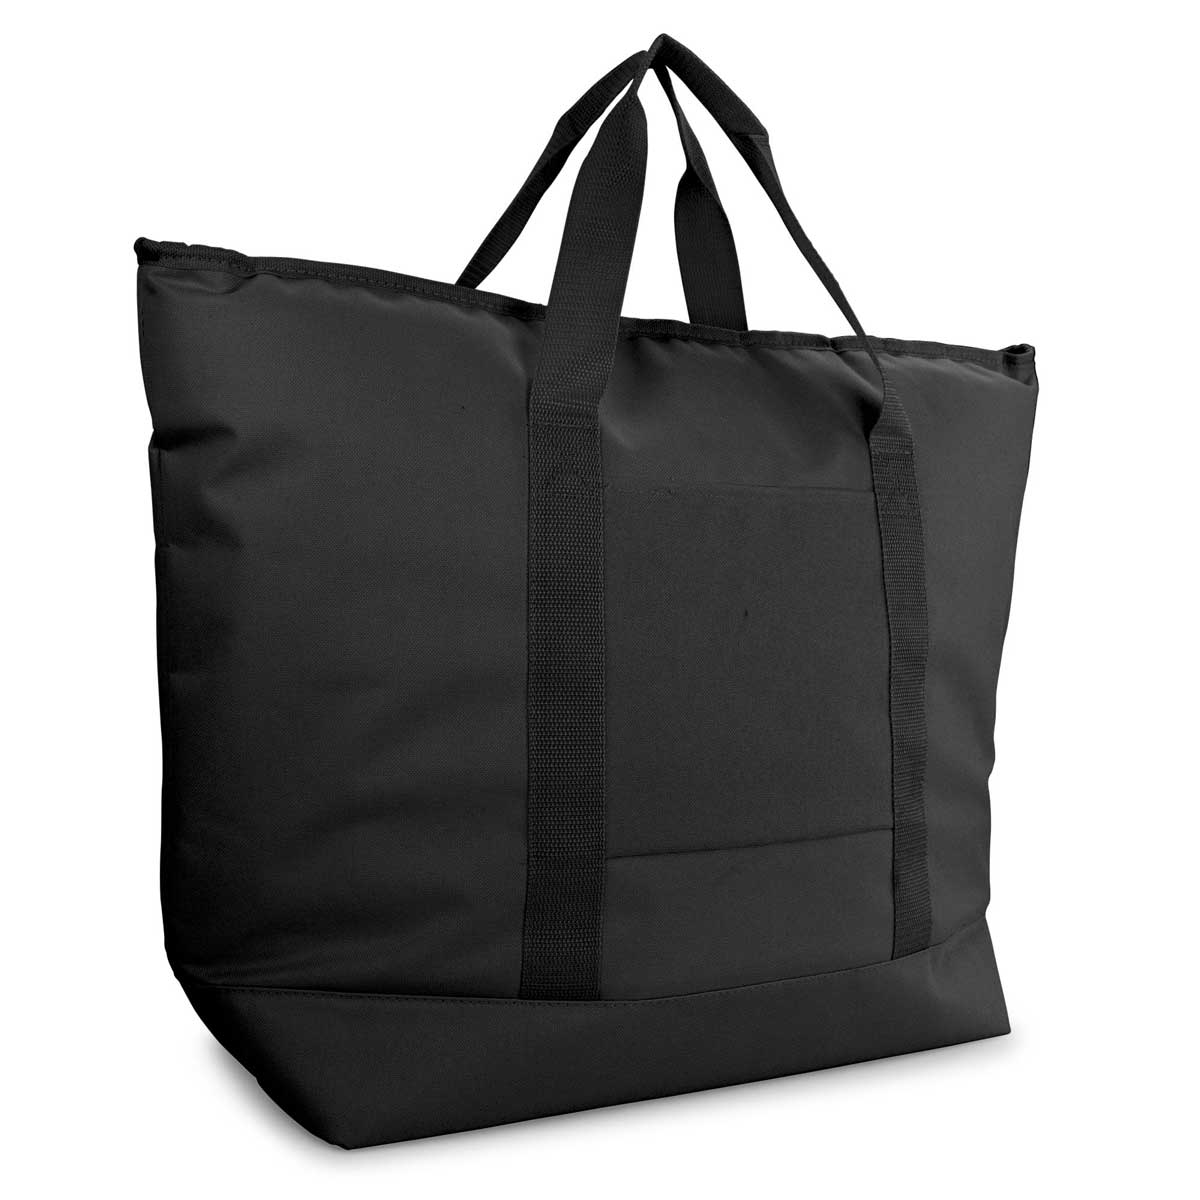 DALIX Large Tote Cooler Bag Insulated Thermal Shopping Tote